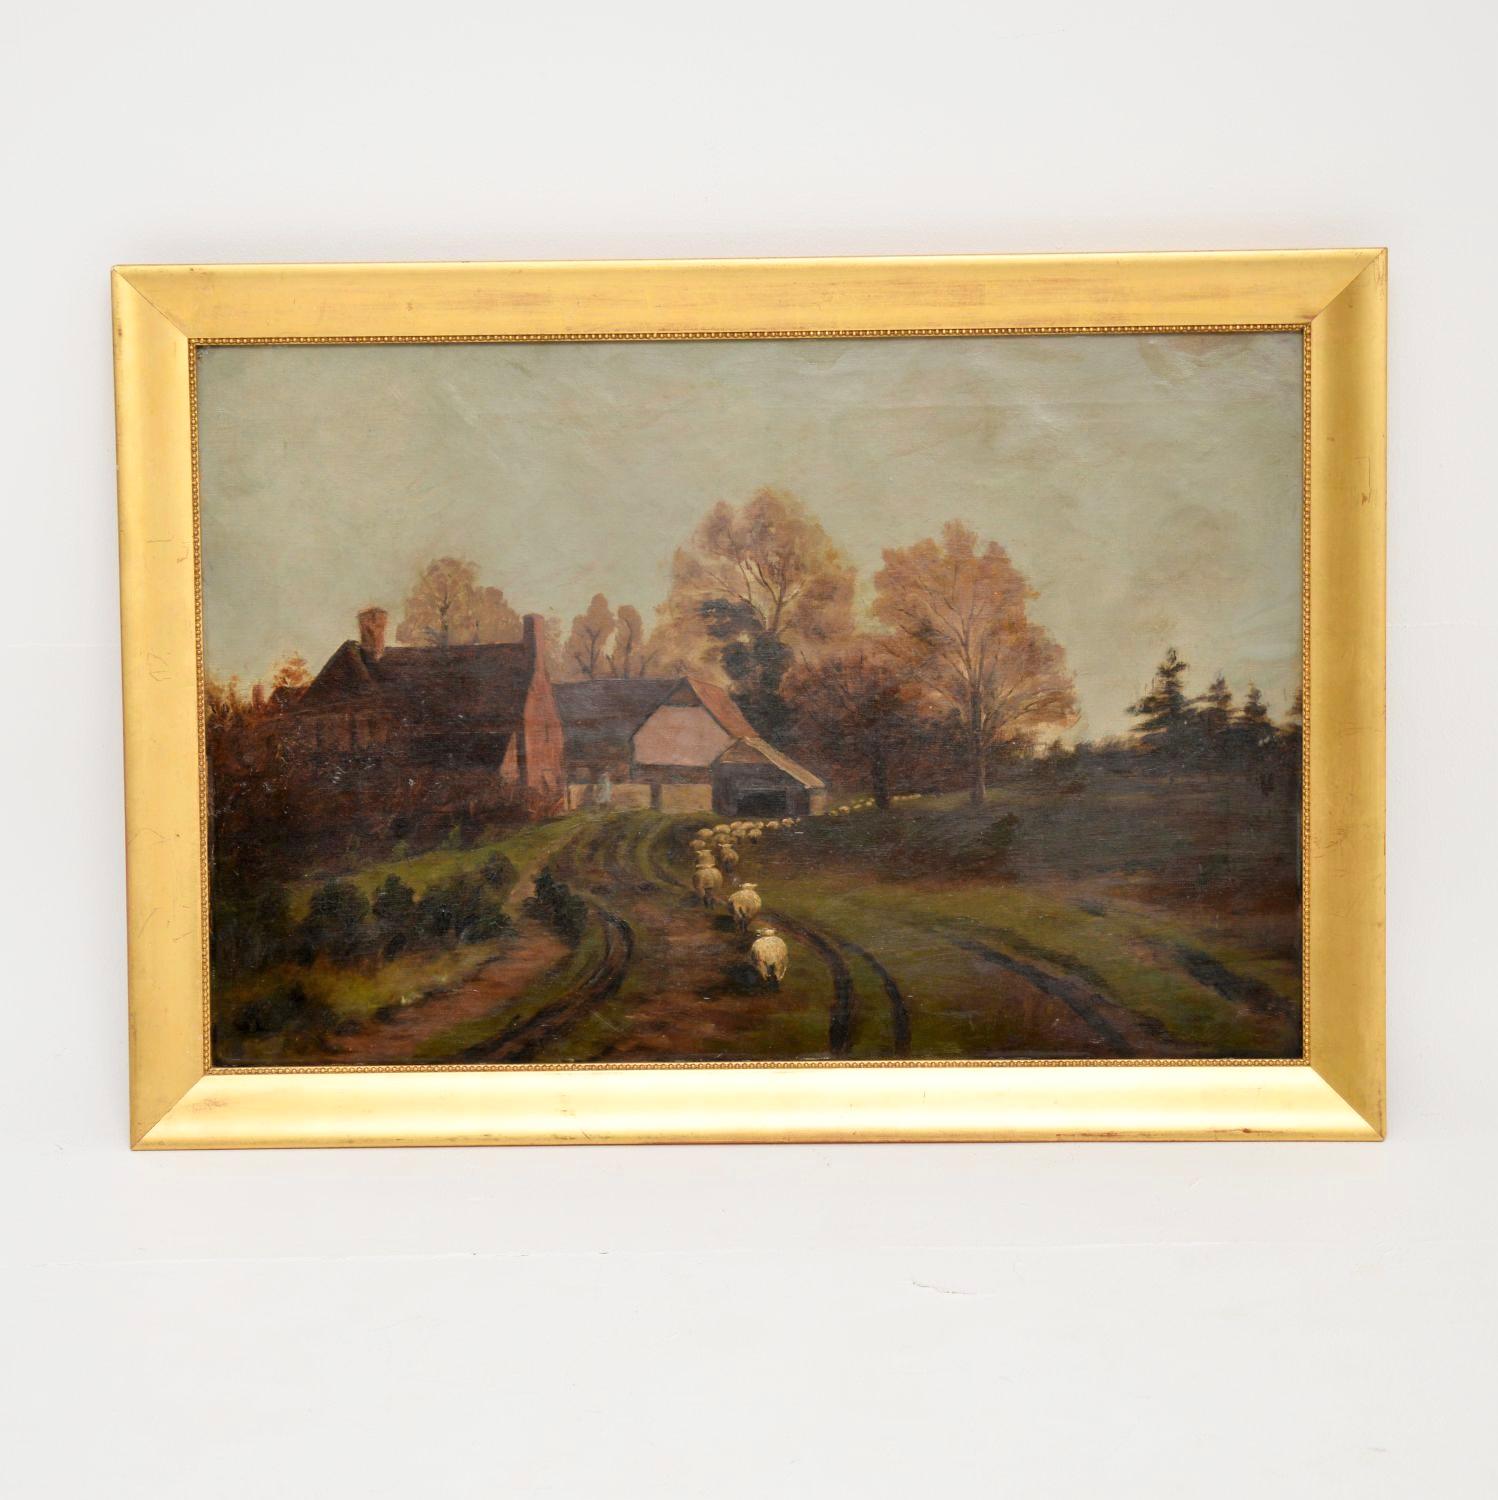 A charming antique Victorian landscape oil painting. This is English, it dates from around the 1860-1880 period.

It is beautifully executed and depicts a countryside scene of sheep being herded along a country road.

It has darkened slightly over